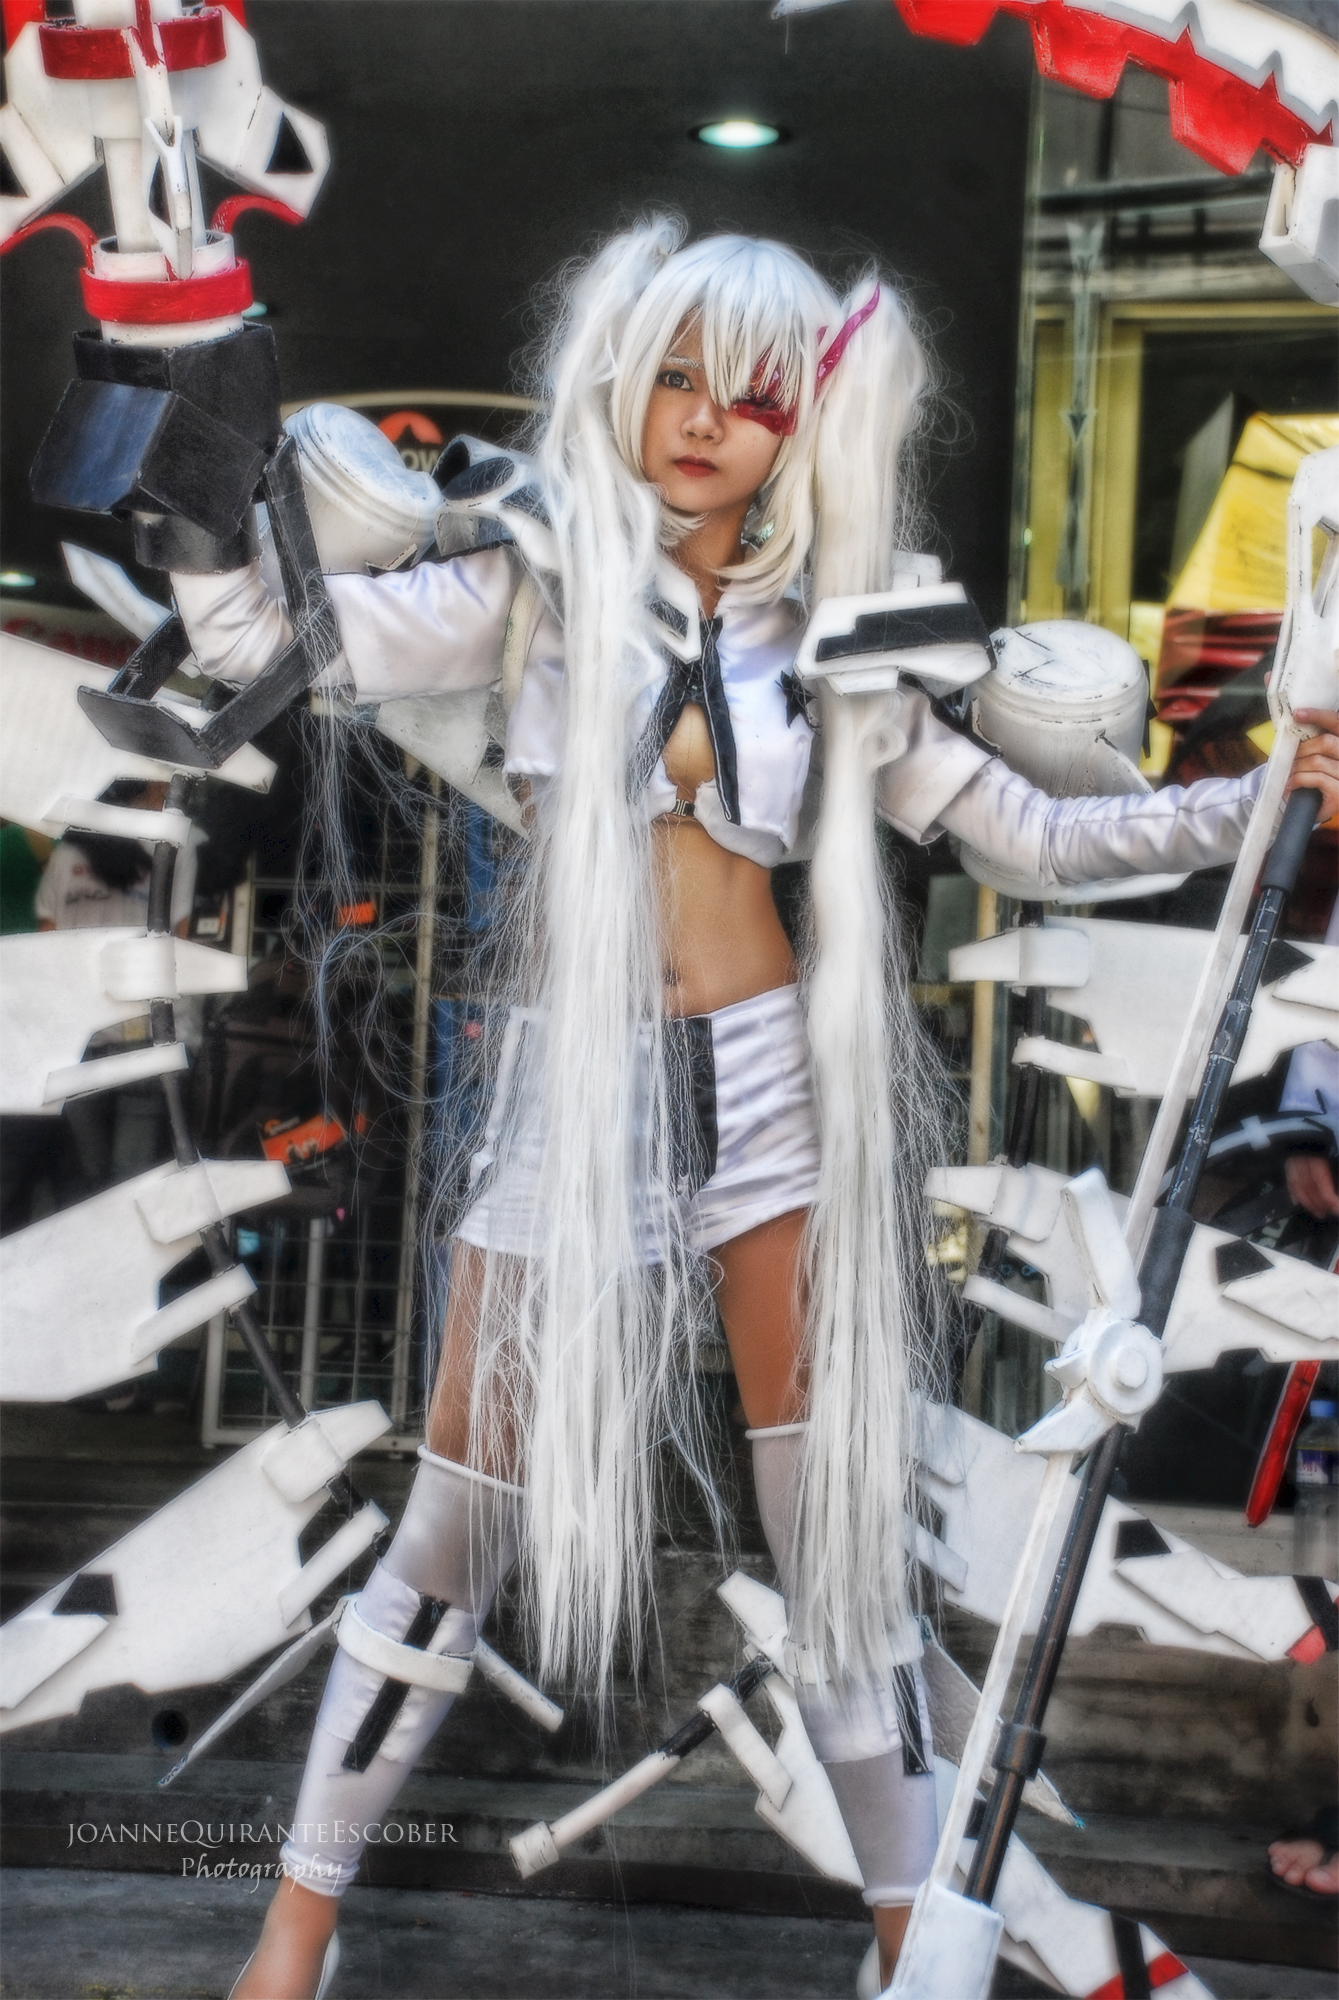 a woman dressed up in cosplay with swords